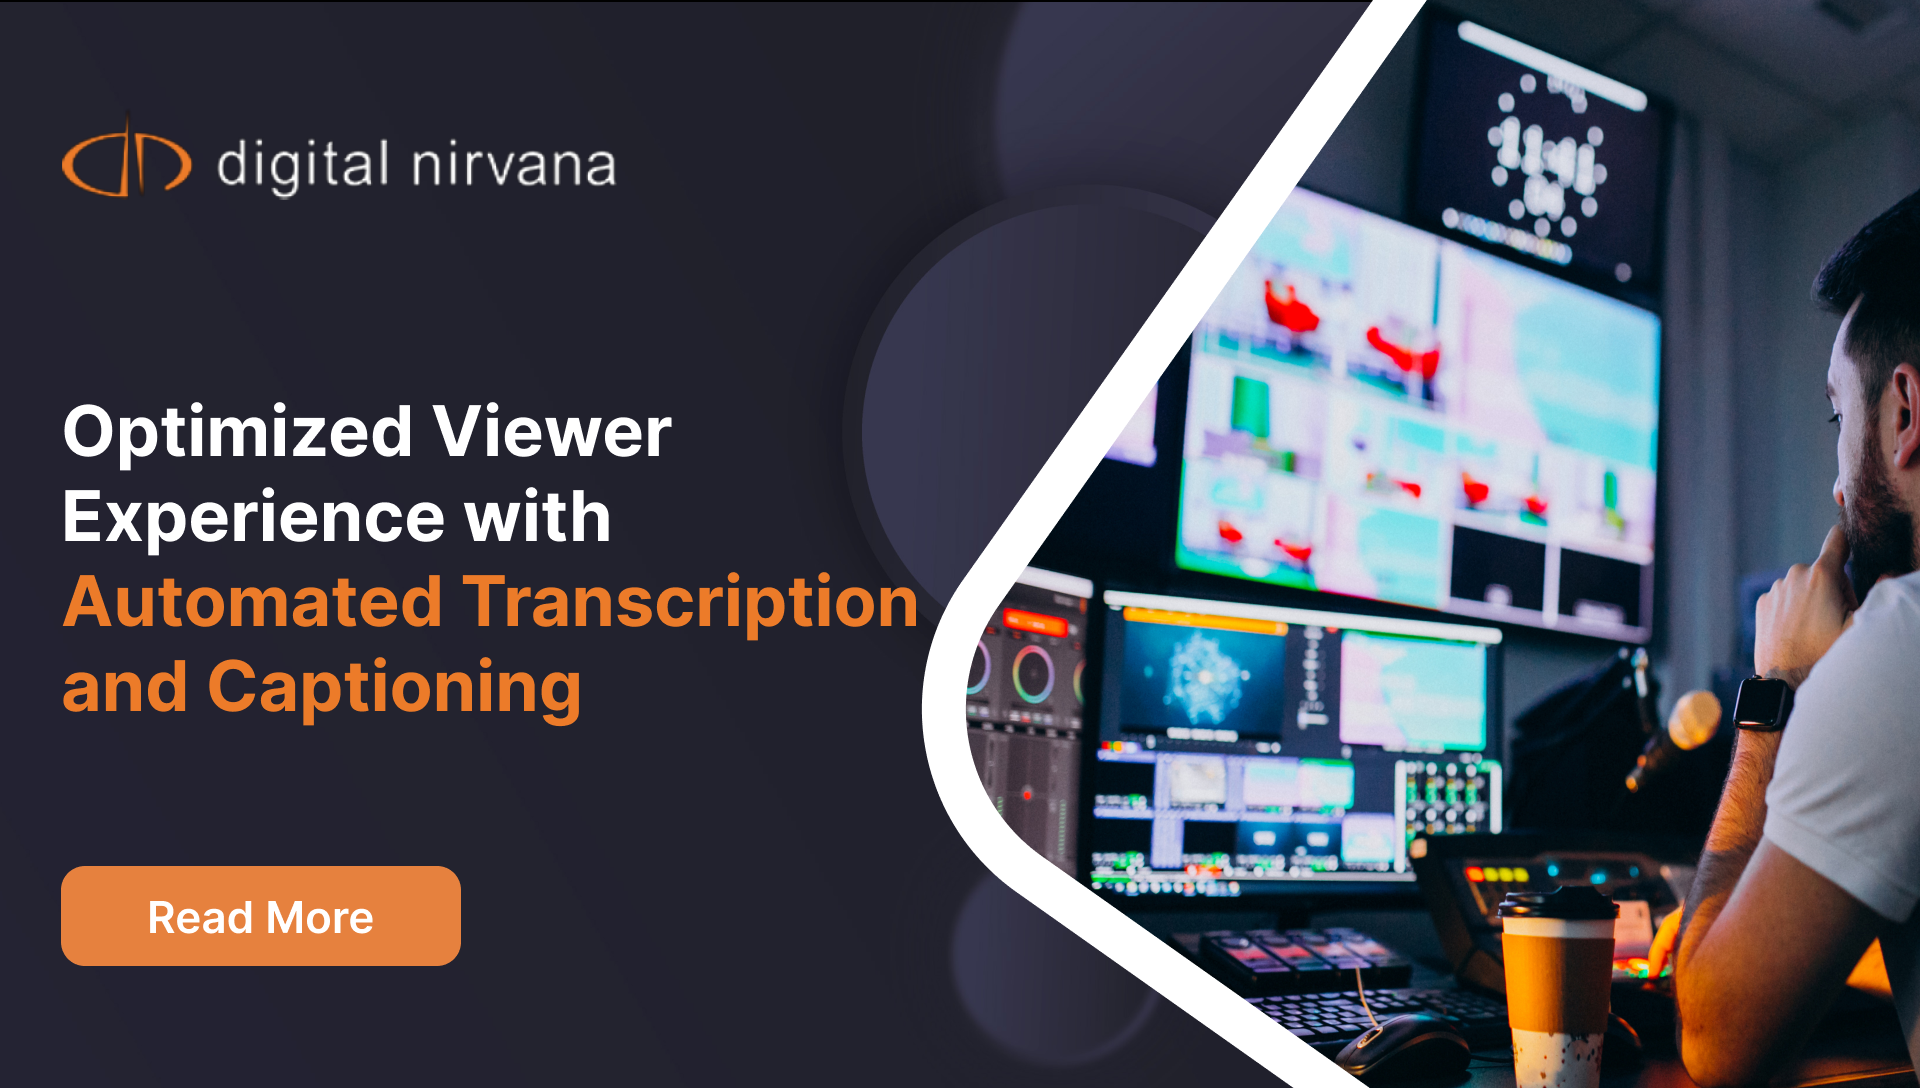 Optimized Viewer Experience with Automated Transcription and Captioning